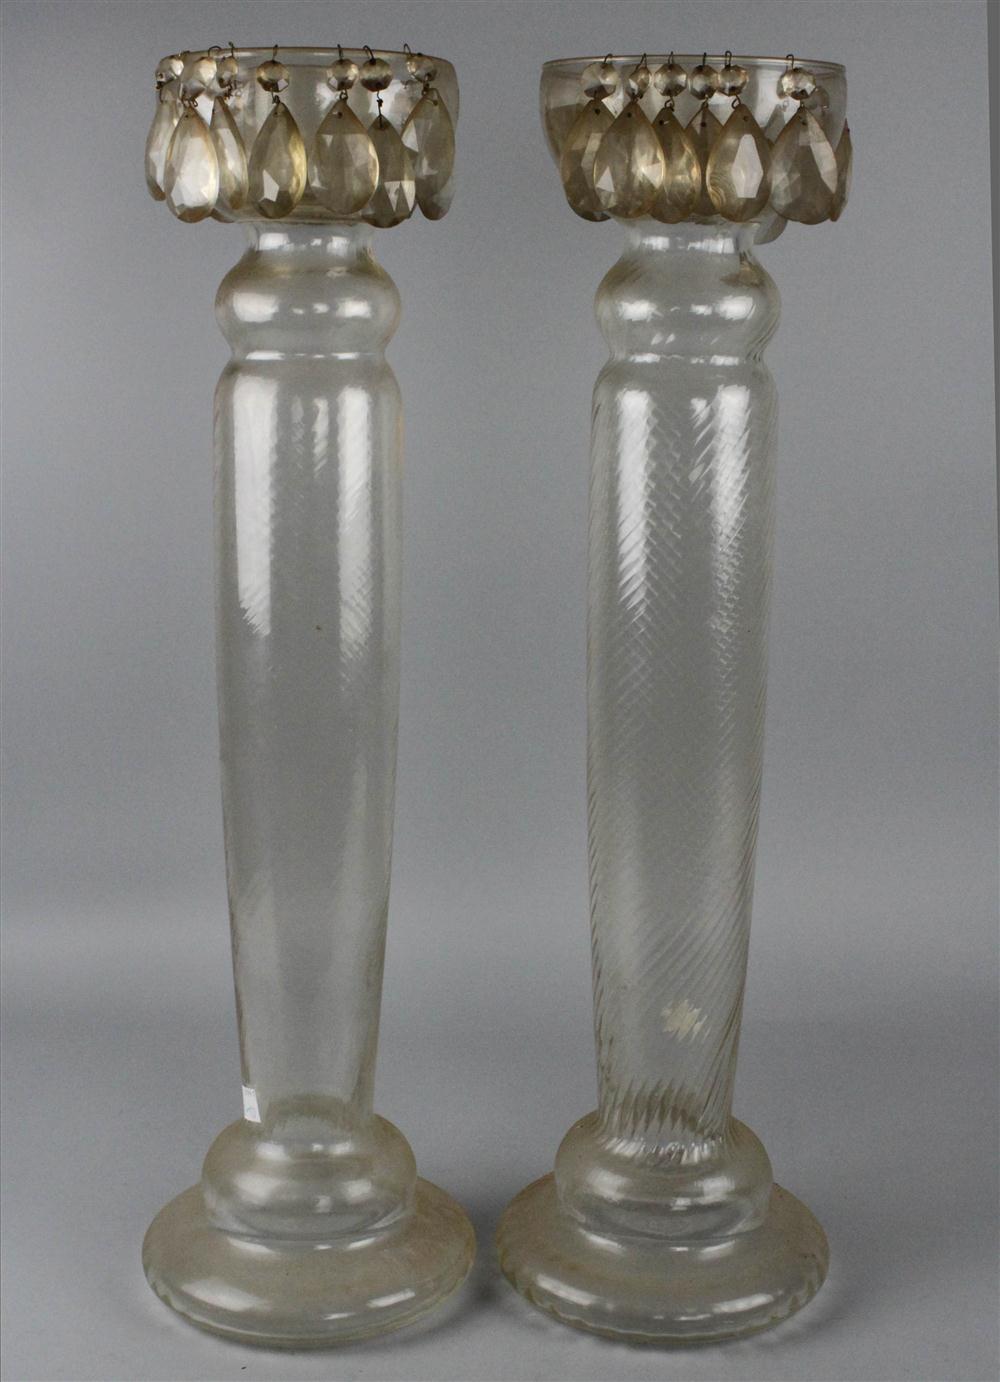 TWO MASSIVE GLASS CANDLEHOLDERS with